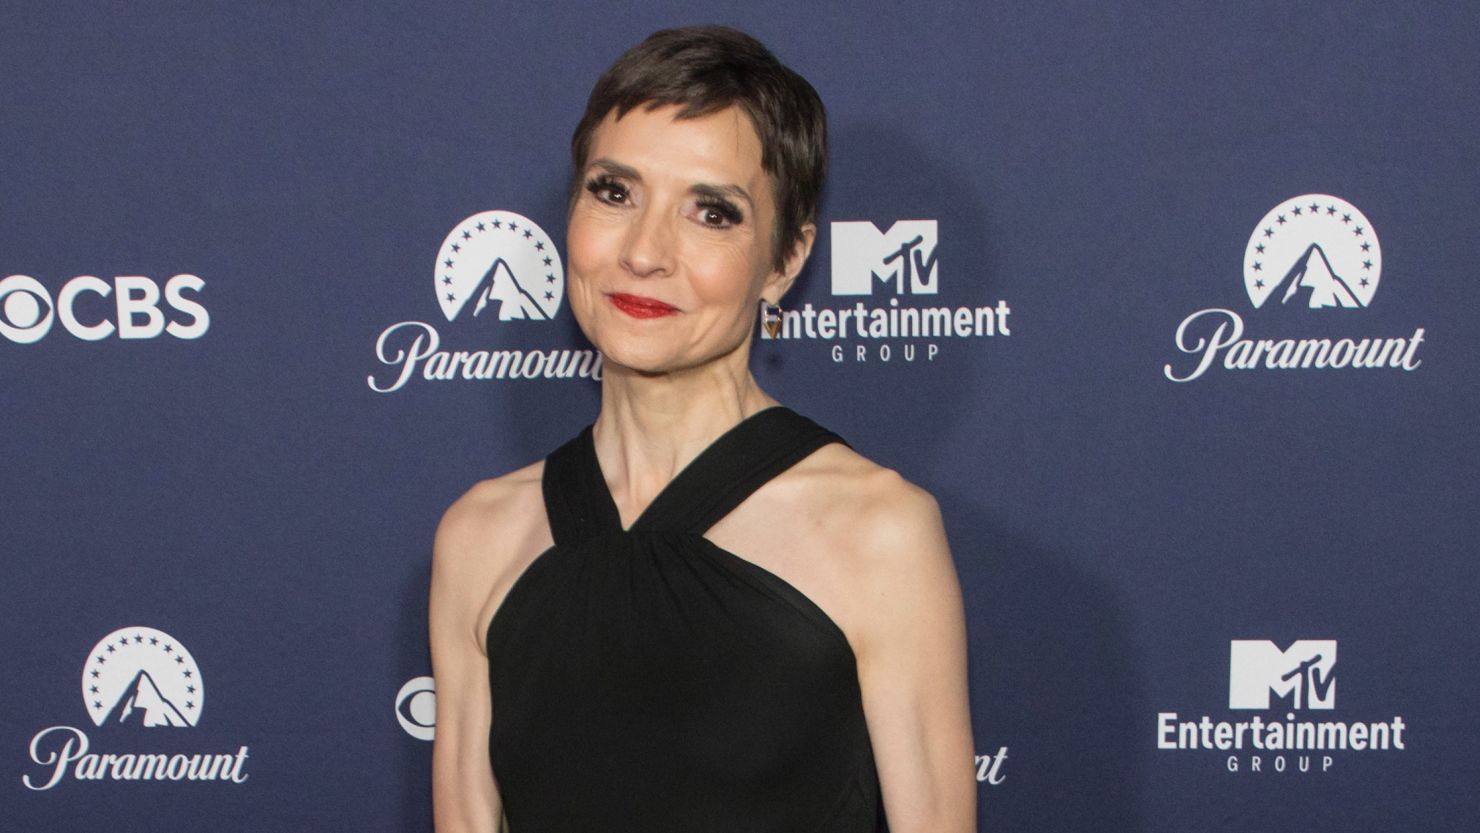 Catherine Herridge attends Paramount's White House Correspondents' Dinner after party at the Residence of the French Ambassador on April 30, 2022 in Washington, DC.